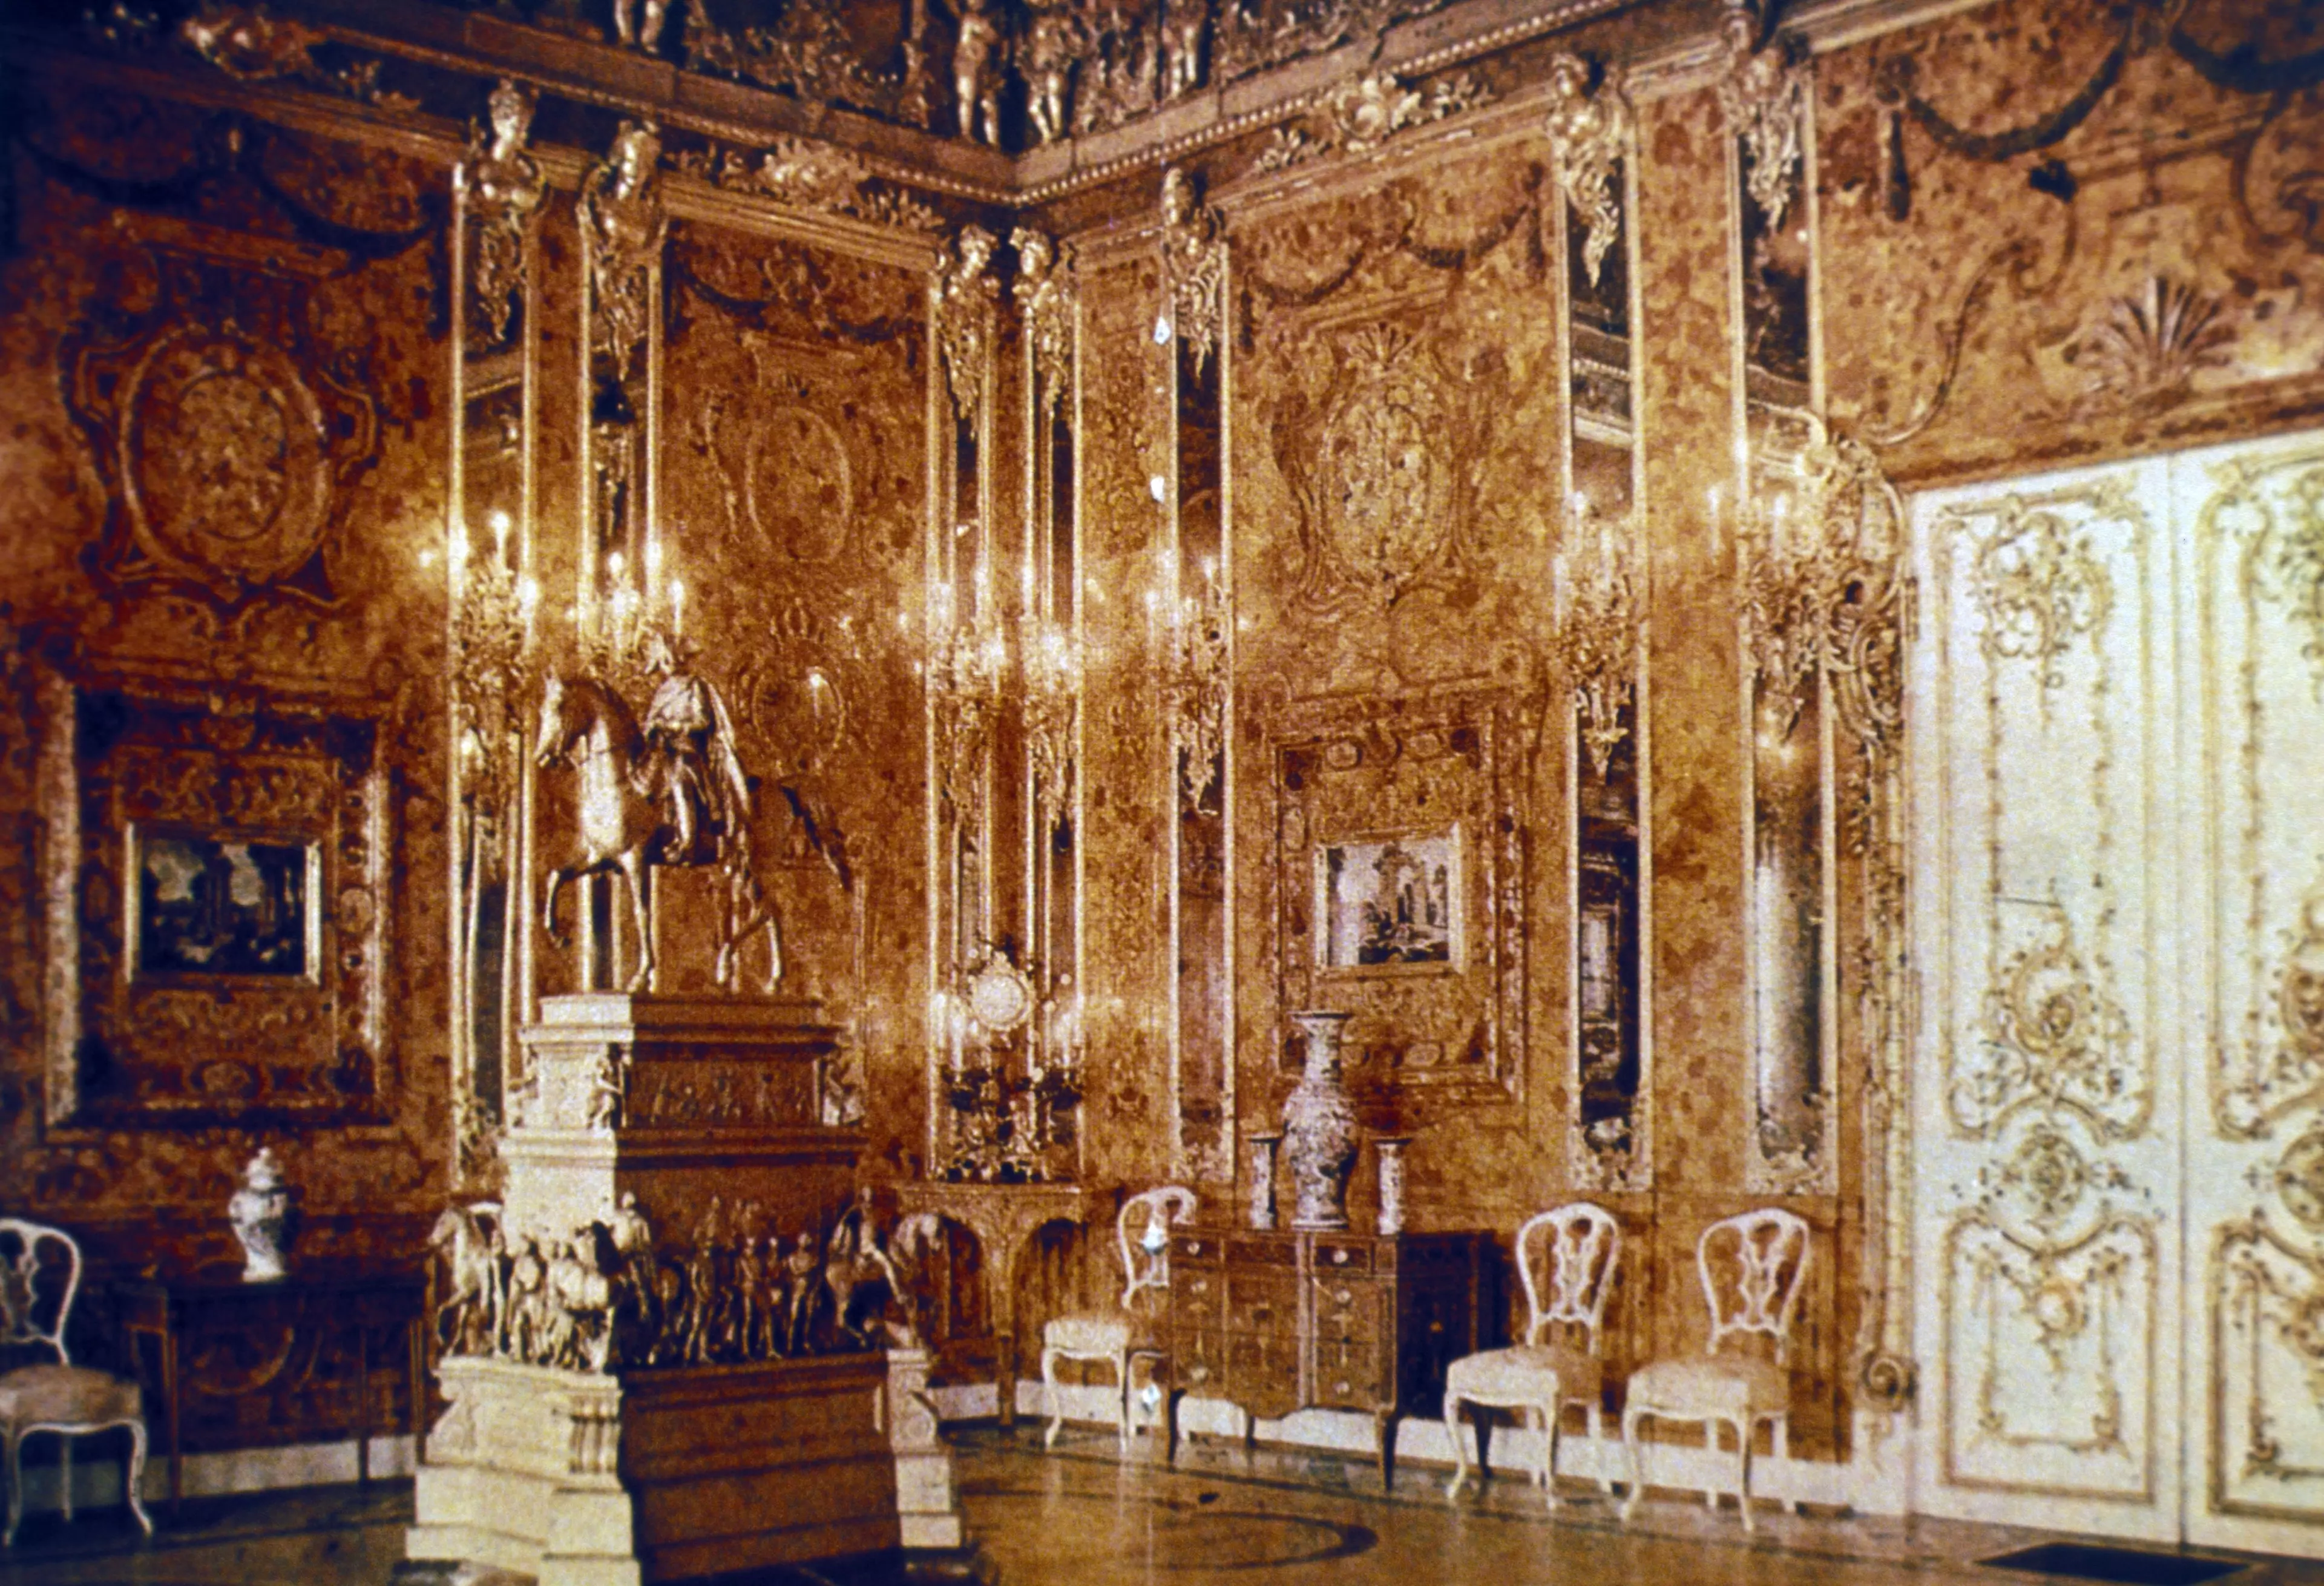 The Amber Room in 1917.